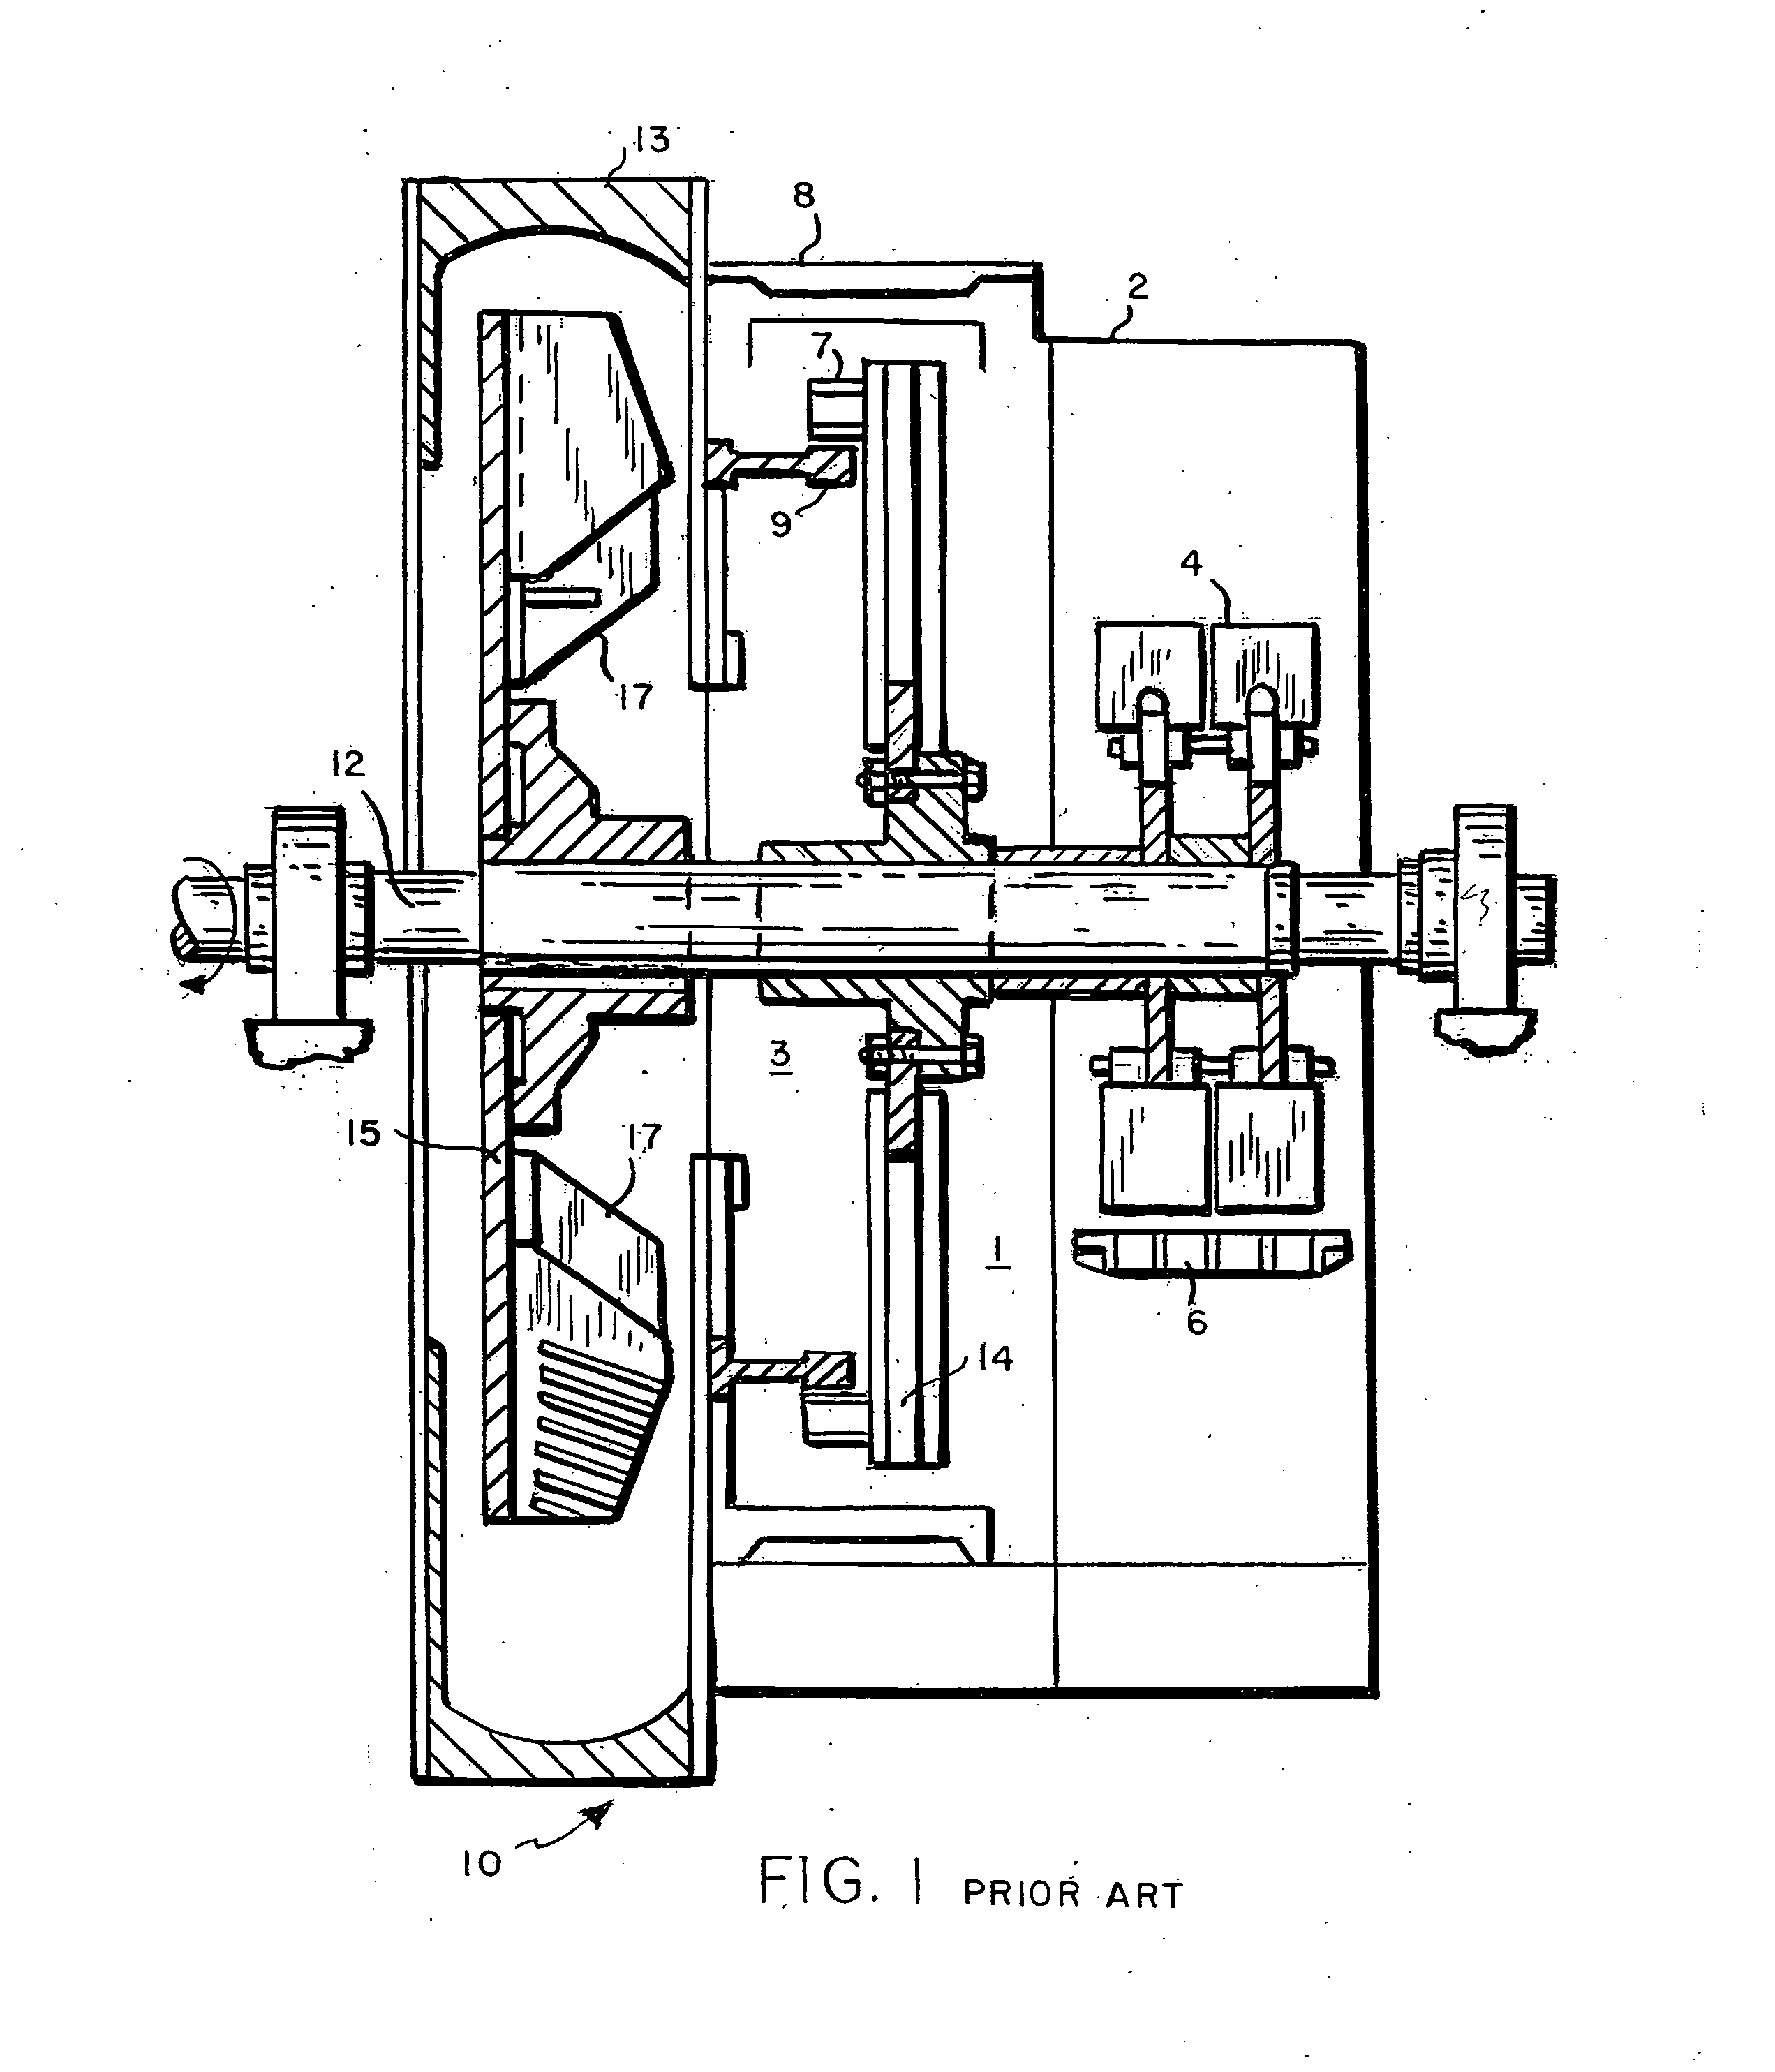 Split fan wheel and split shroud assemblies and methods of manufacturing and assembling the same